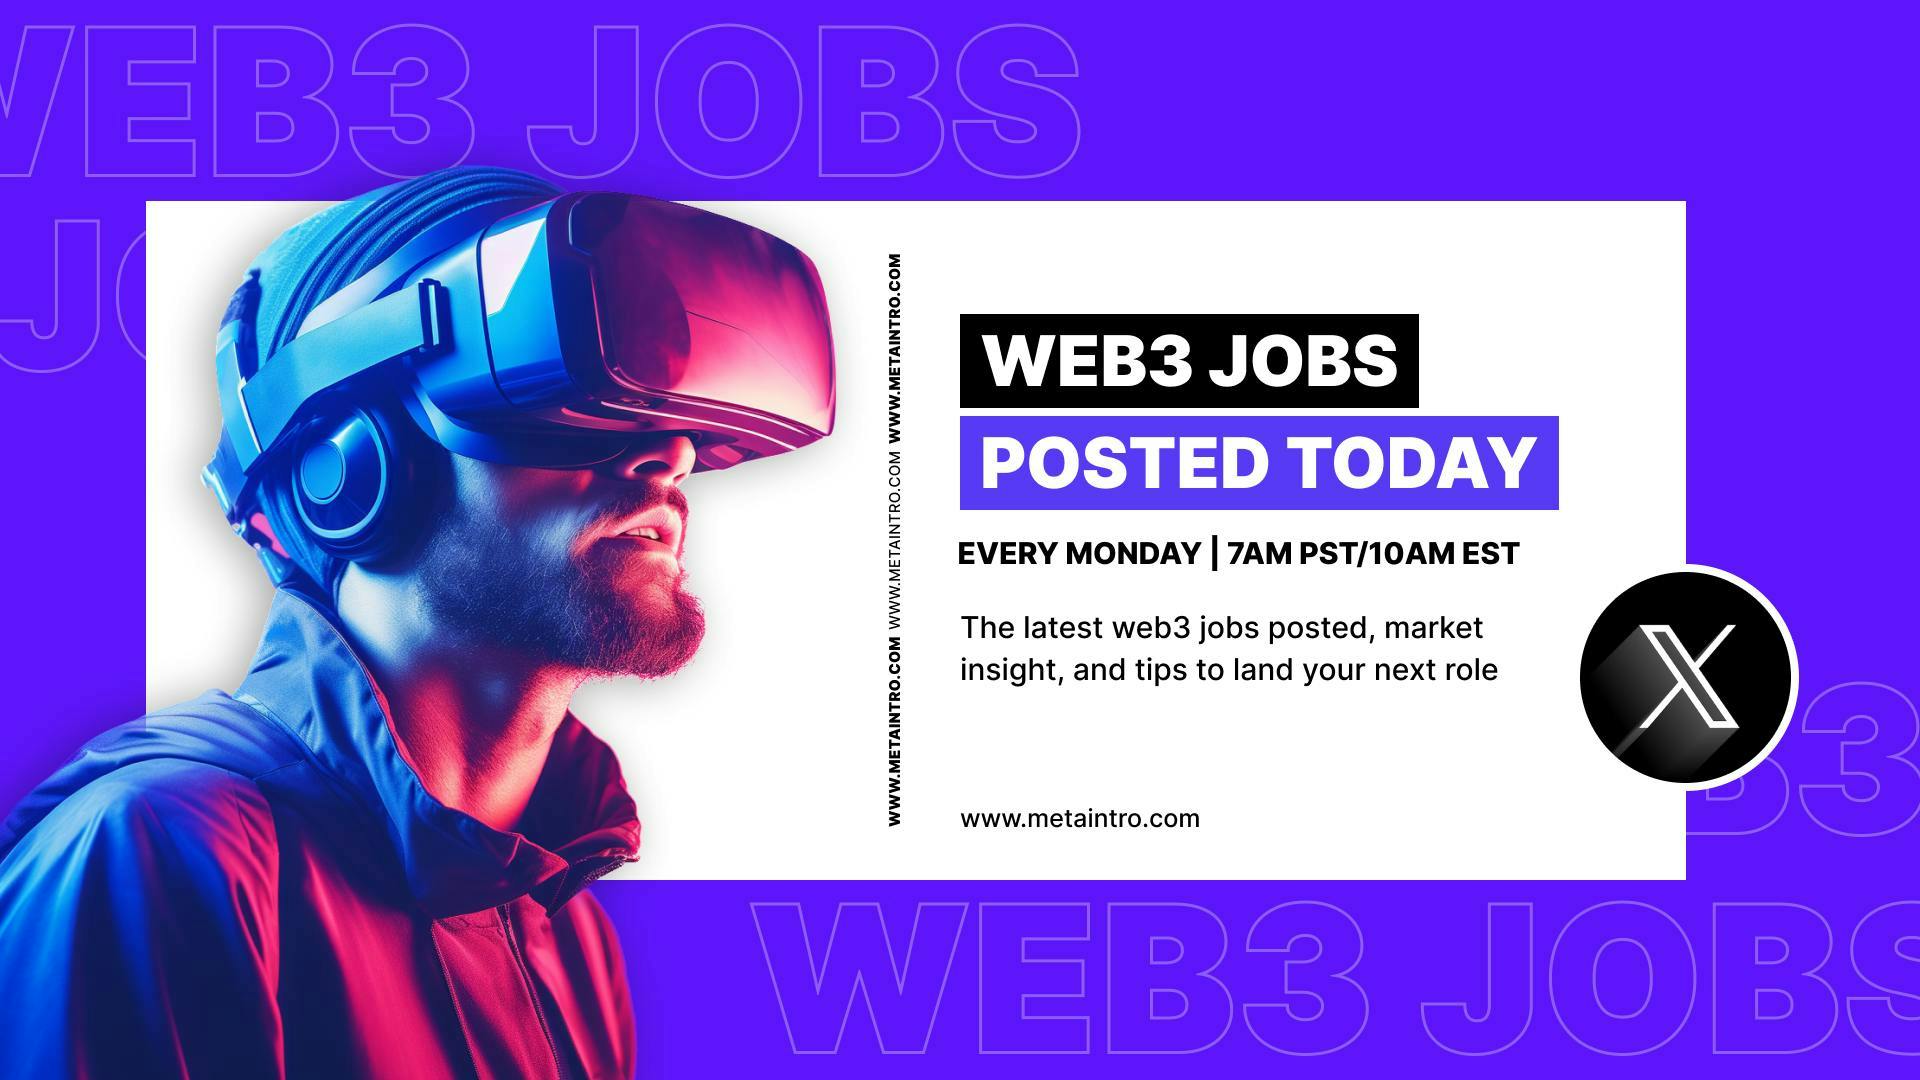 Web3 Jobs Just Posted Today